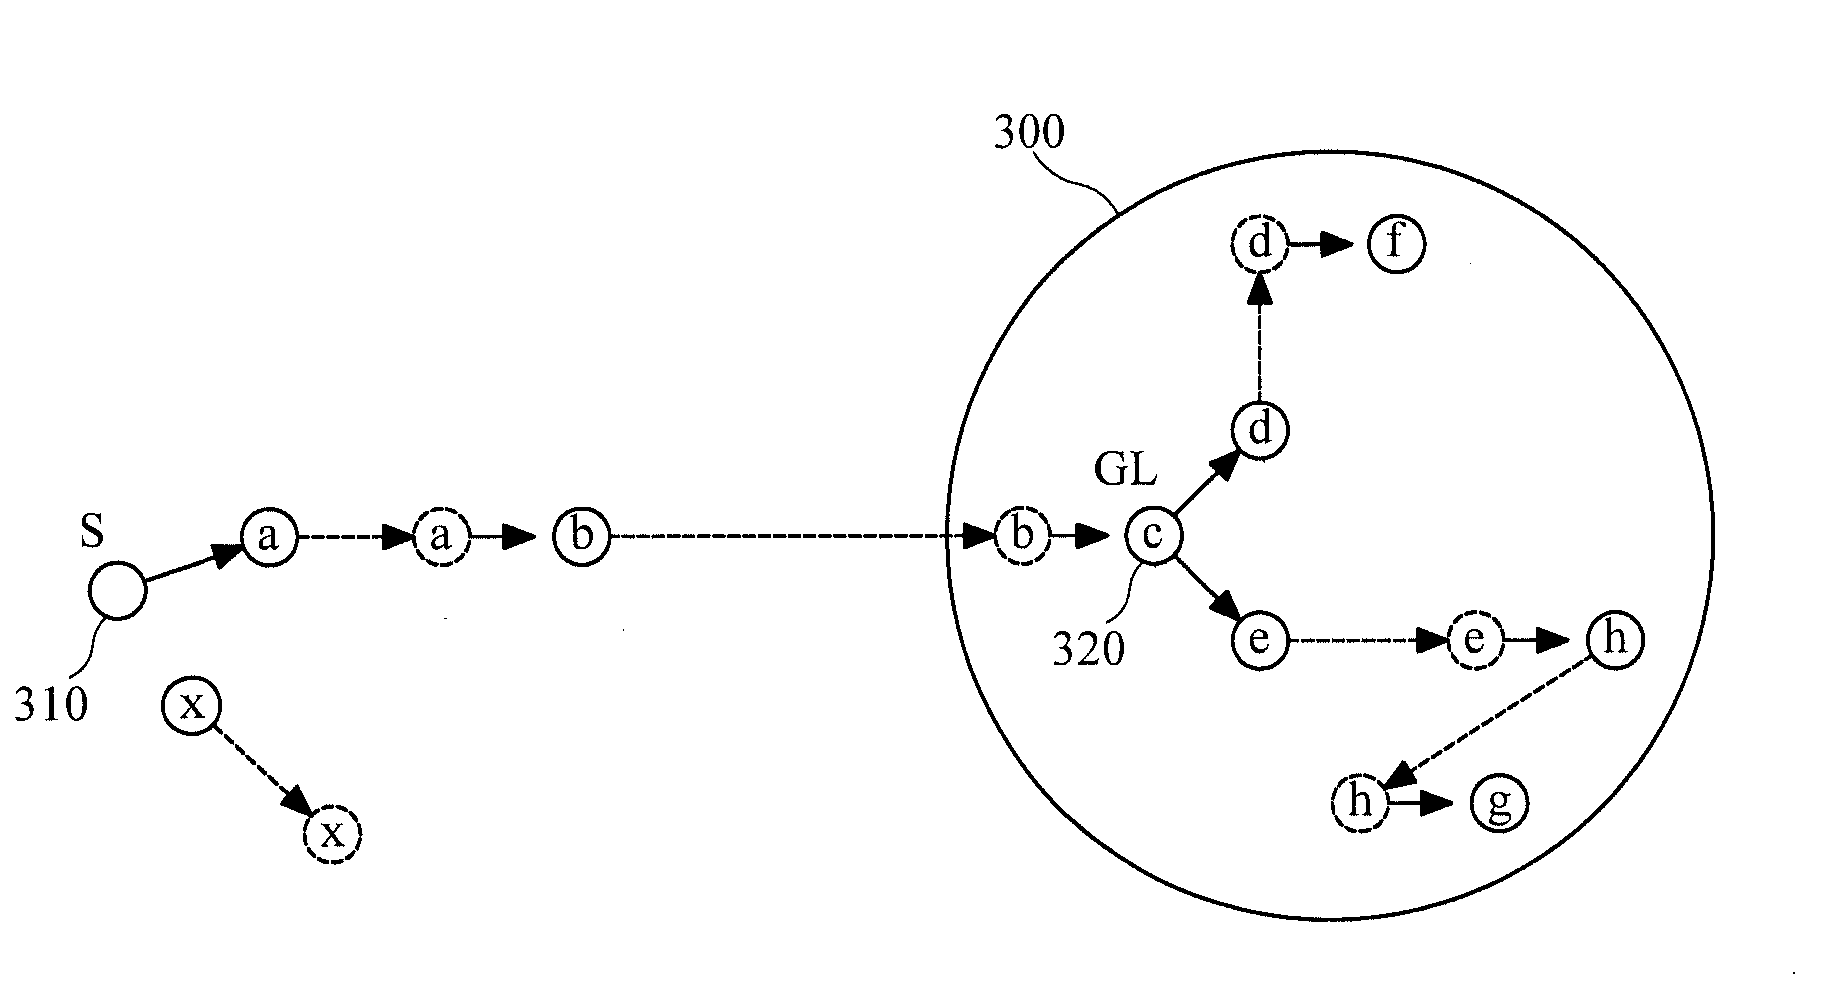 Multicast communication method, apparatus and system for intermittently connected network